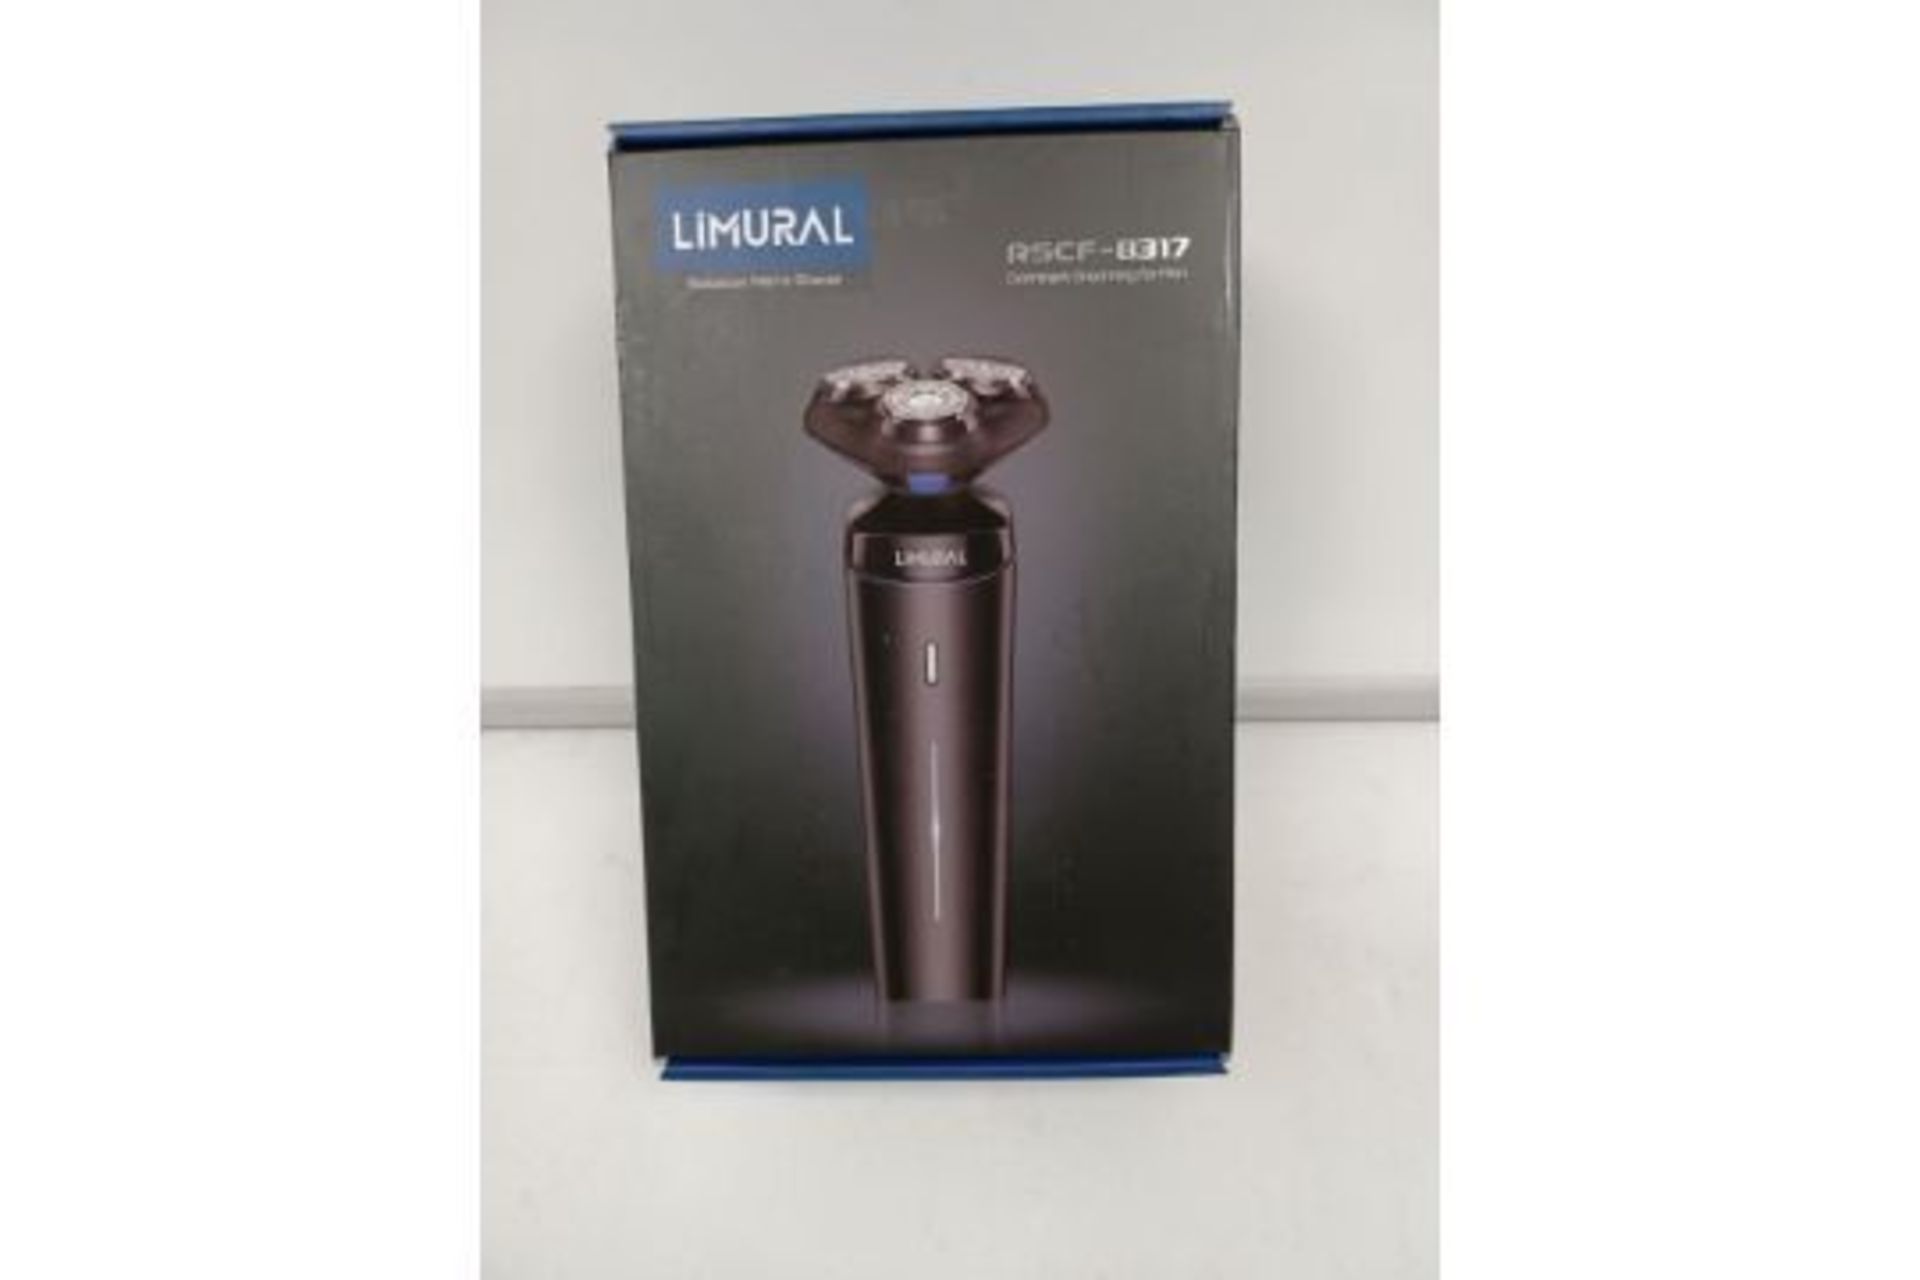 2 X NEW BOXED LIMURAL ROTATION MENS ELECTRIC SHAVERS. RSCF-8317. LITHIUM ION BATTERY. OFC